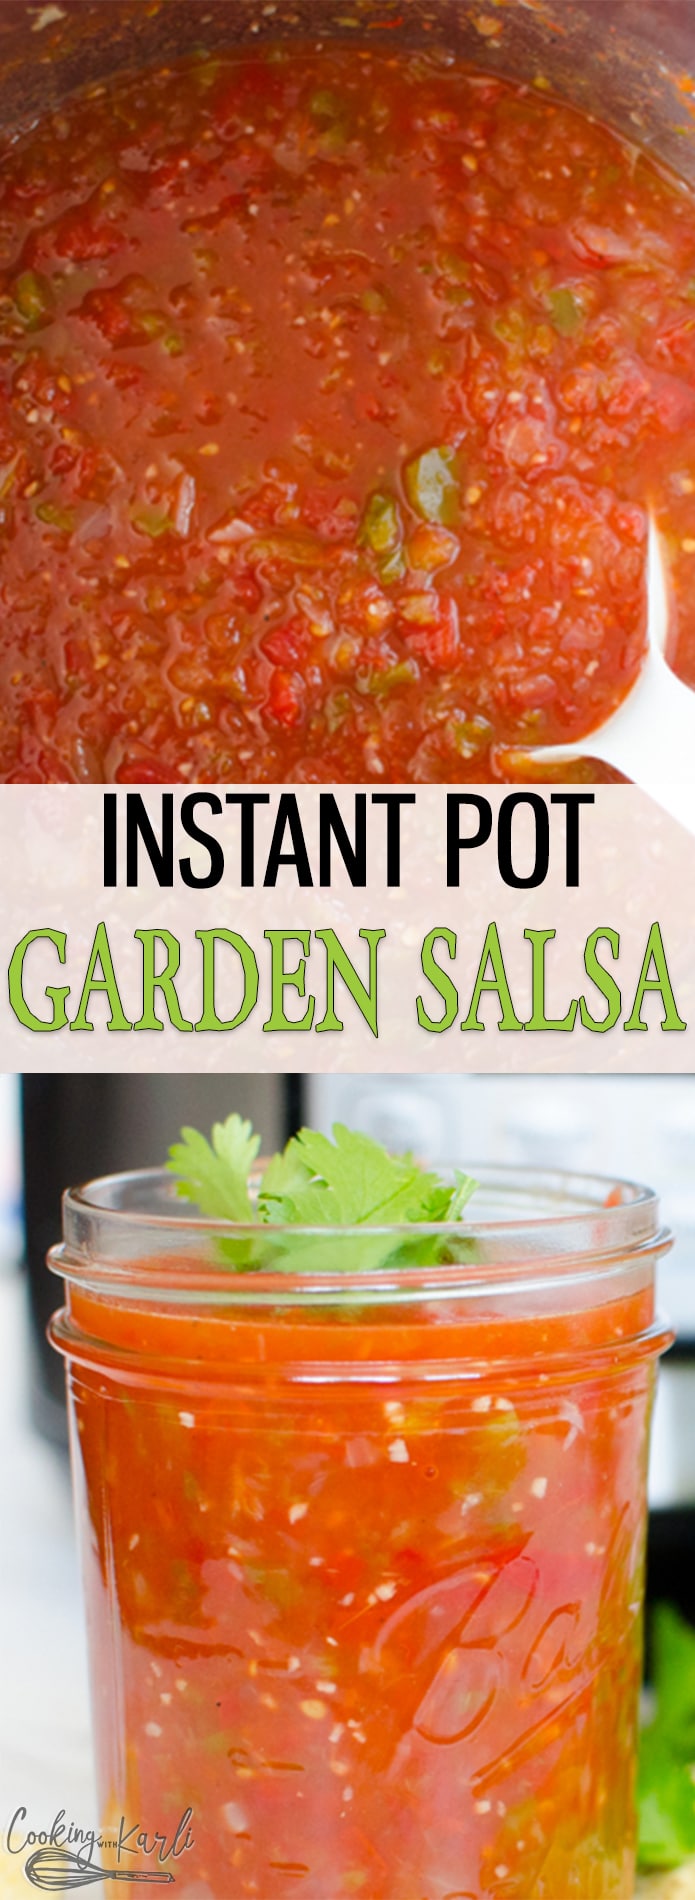 Homemade Salsa is garden fresh, full of delicious ripe tomatoes, onion, bell pepper, jalapeños, lime juice and cilantro. This salsa recipe is perfect for dunking a tortilla chip into or for use in recipes. Learn how to make salsa and be stunned at how easy it is! |Cooking with Karli| #salsa #freshtomatoes #garden #instantpot #stovetop #easy #fast